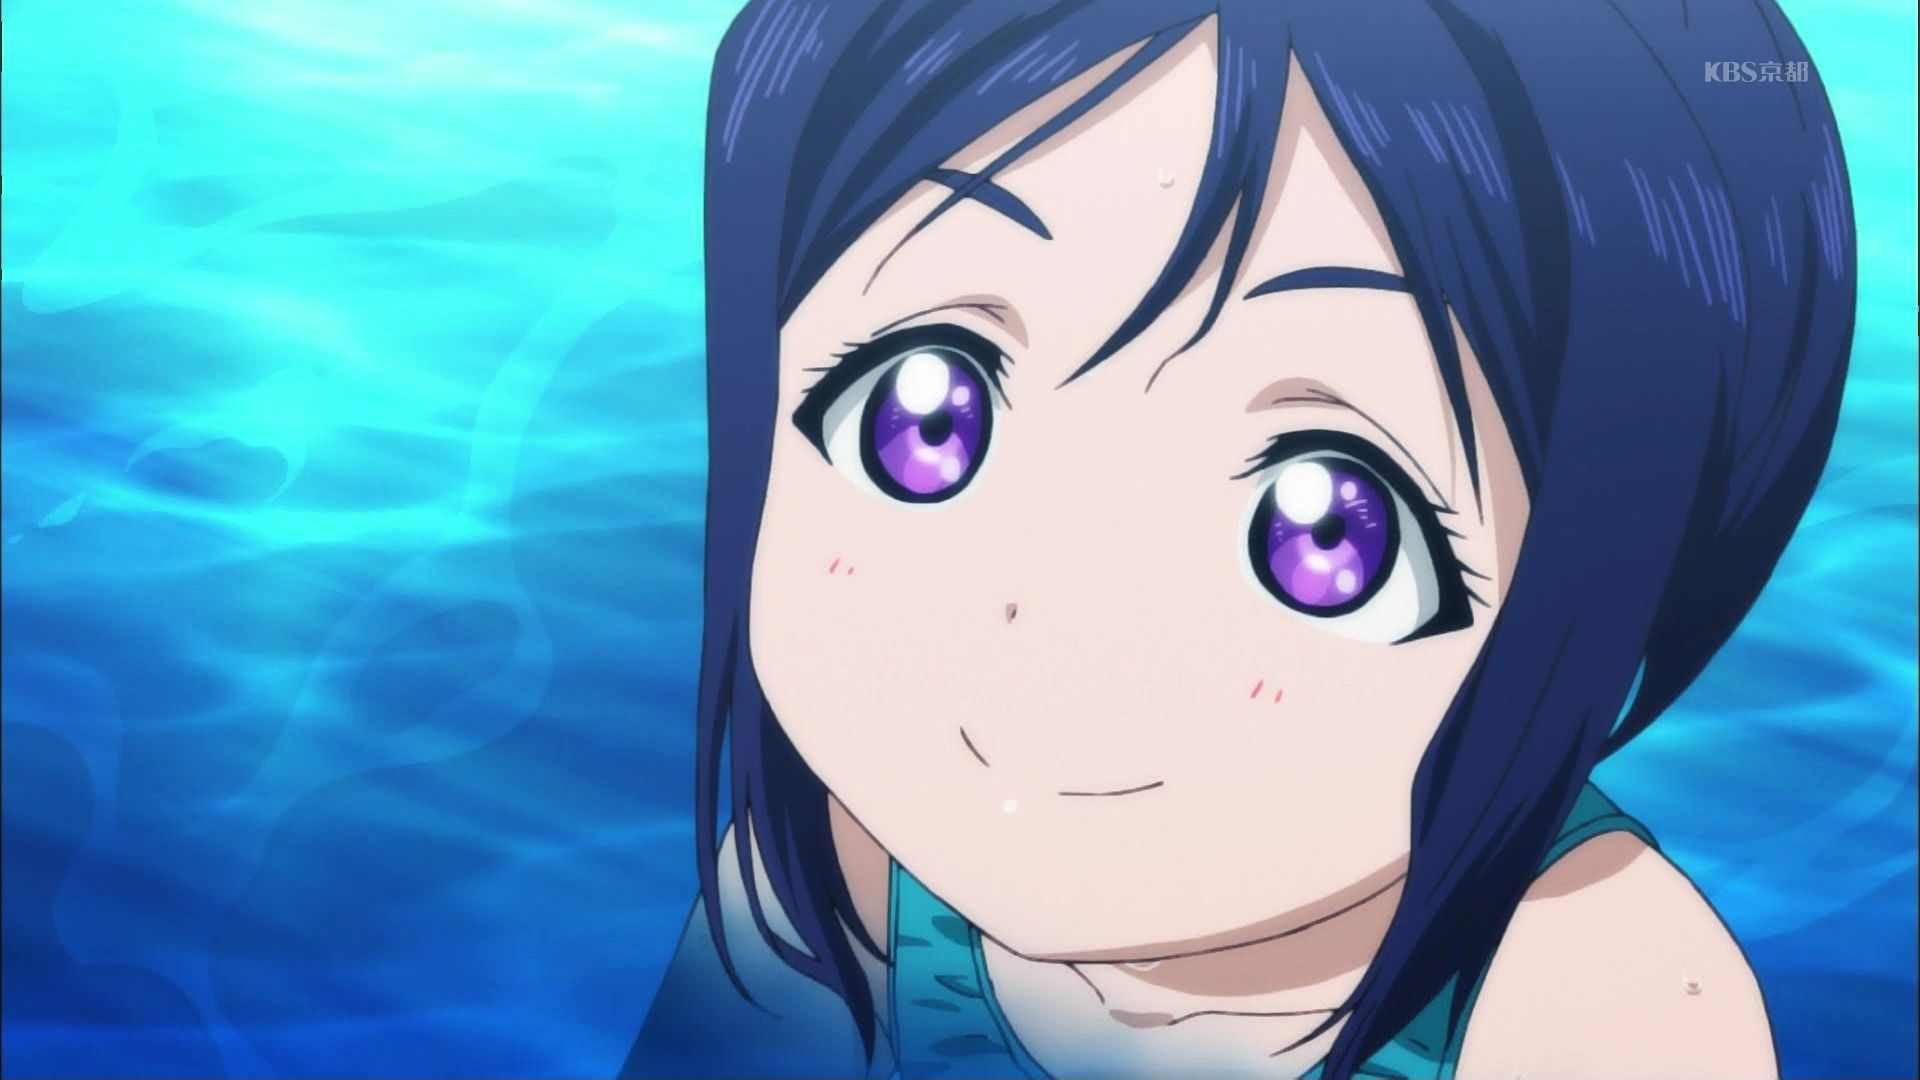 [God images] "love live! "If you see a loli age of members to be happy too, Lori live's tummy! And shout from wwwwww 12